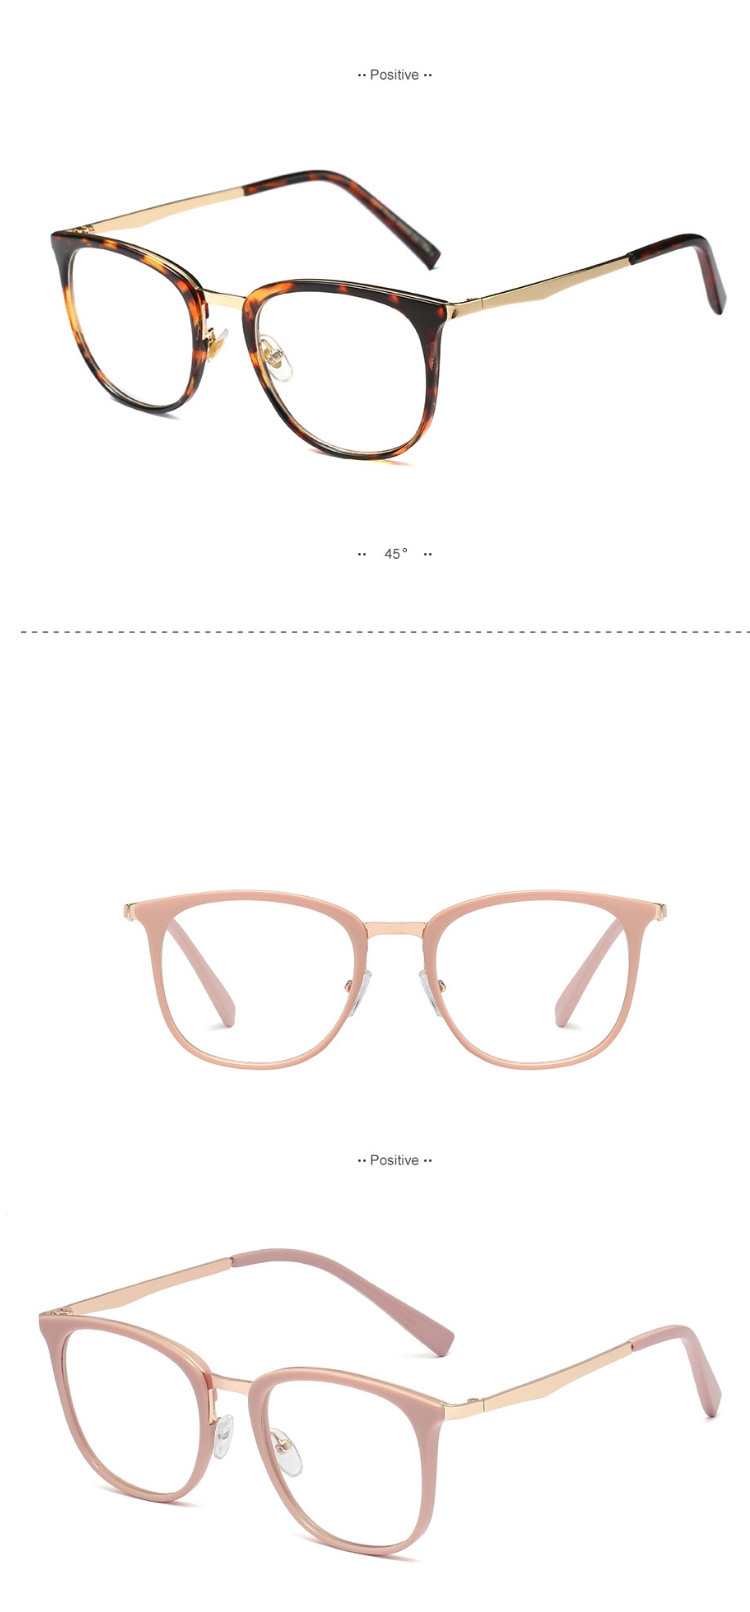 Fashion C2-2 Khaki/transparent Ultra-light Can Be Equipped With Myopia Round Frame,Fashion Glasses